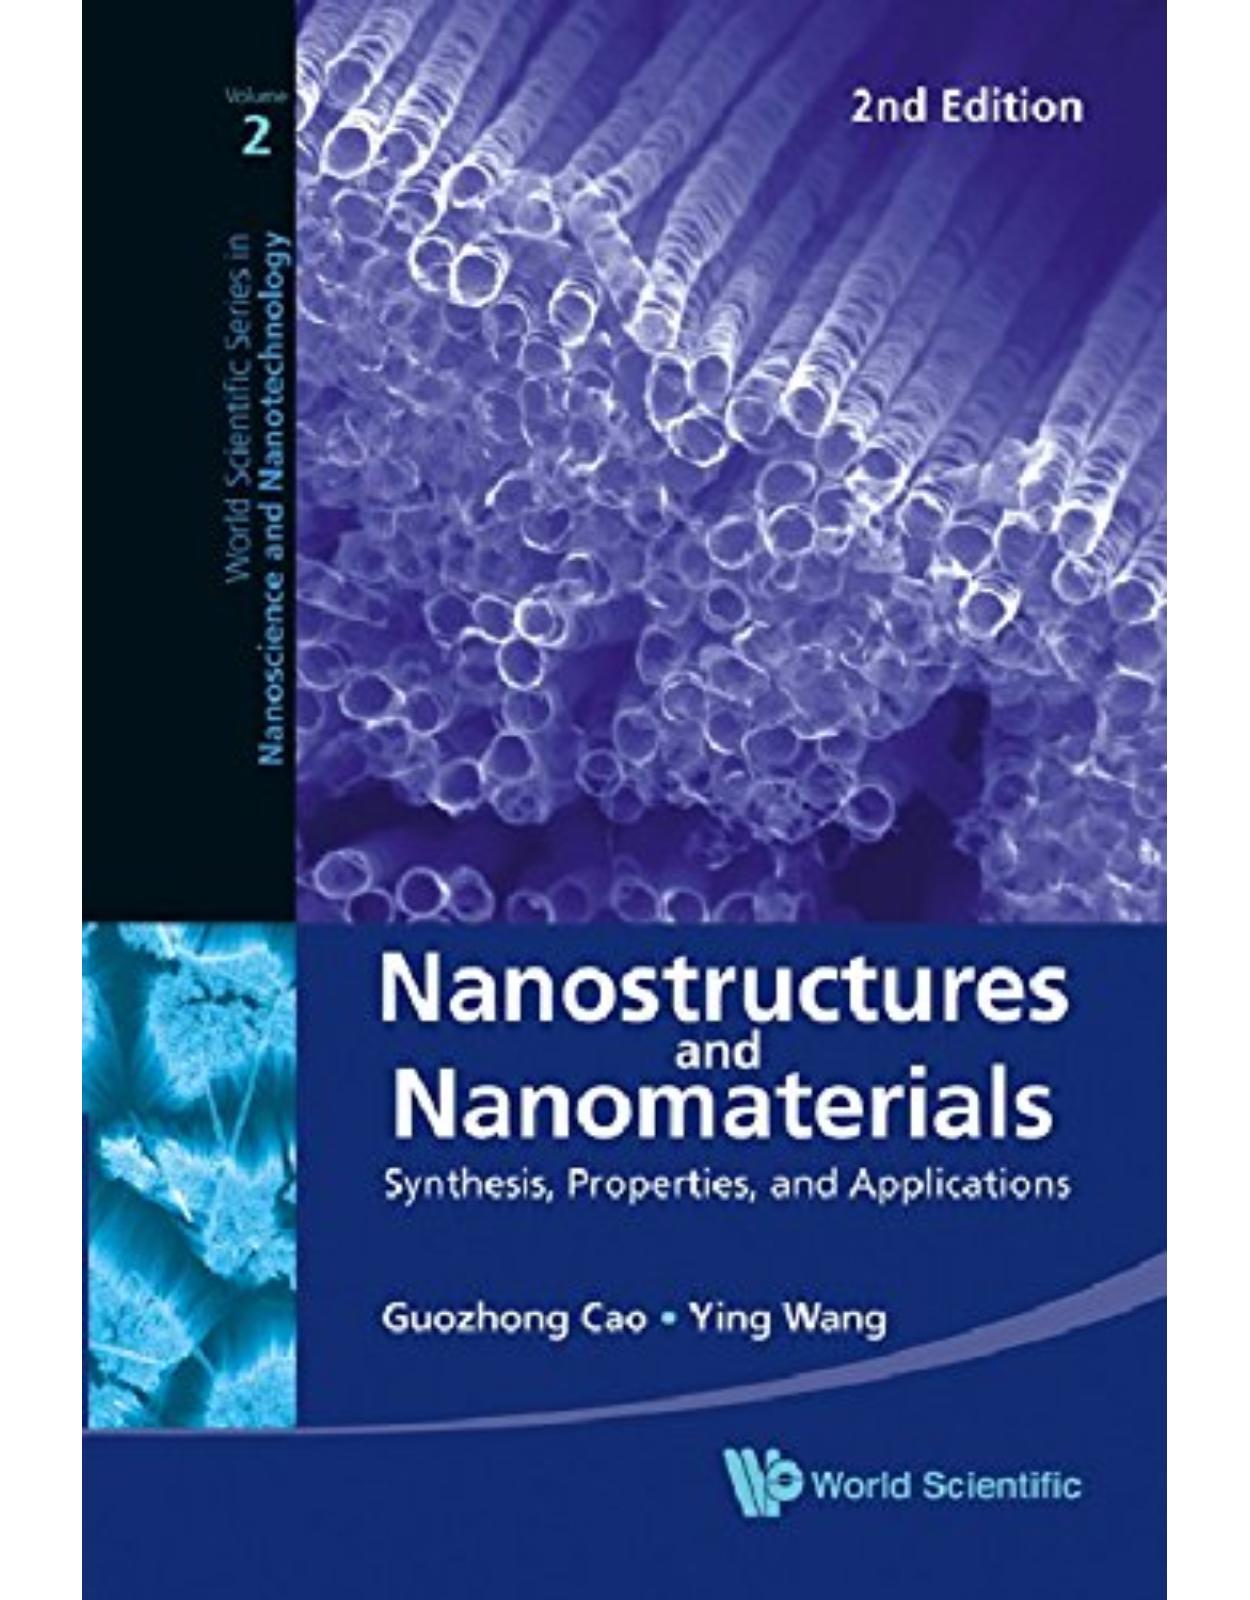 Nanostructures and Nanomaterials: Synthesis, Properties, and Applications (2nd Edition) (World Scientific Series in Nanoscience and Nanotechnology)